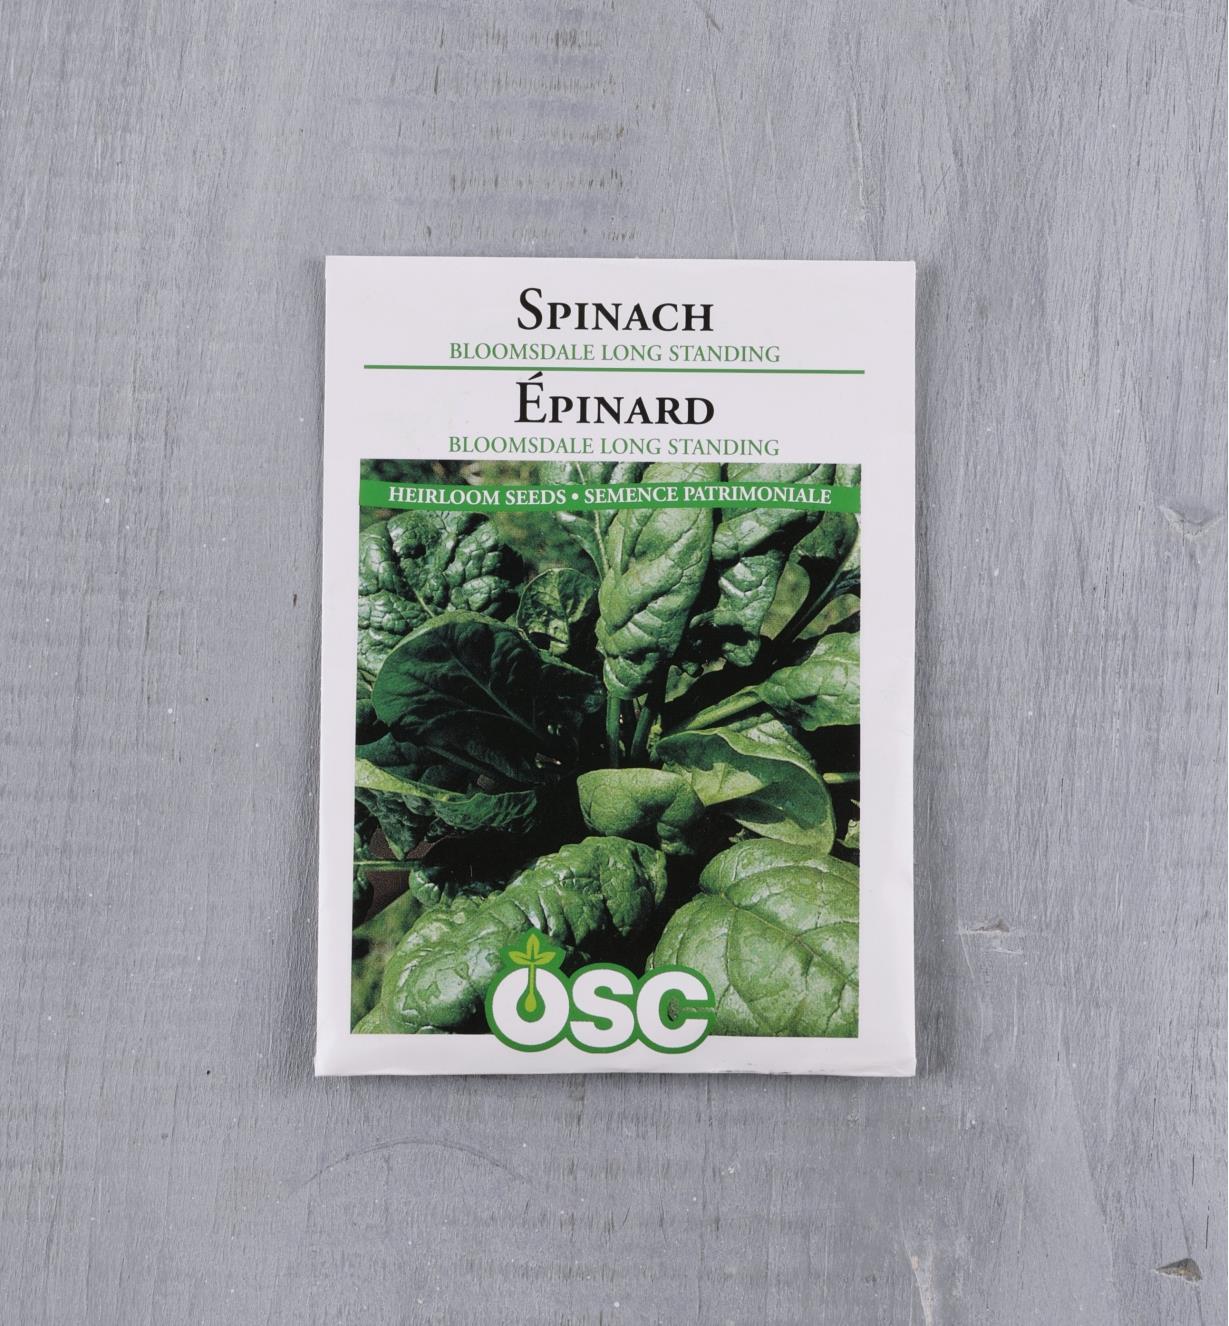 SD115 - Spinach, Bloomsdale